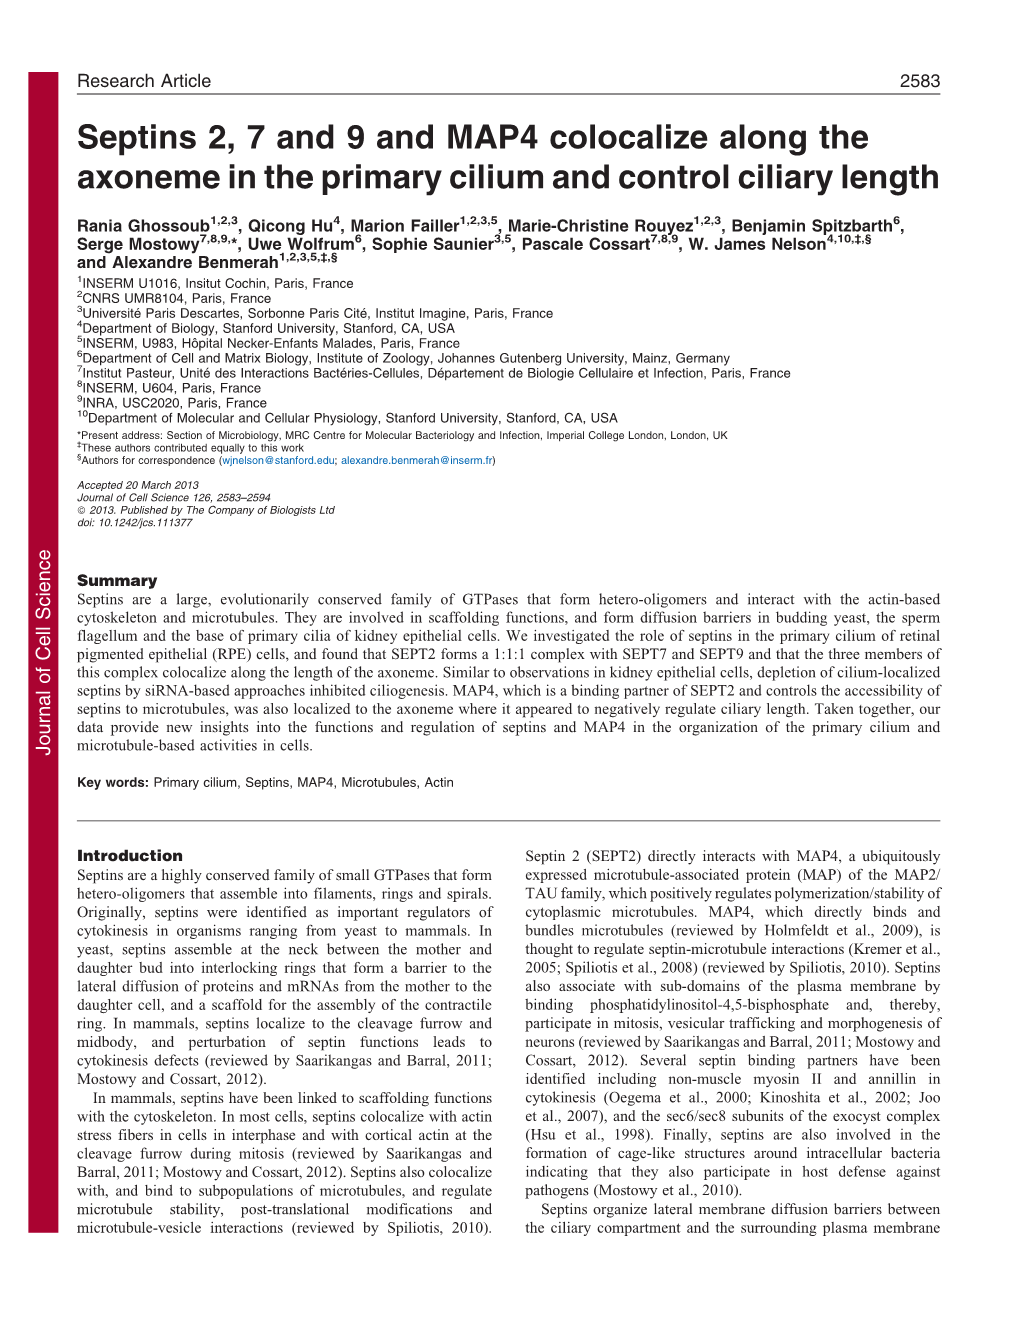 Septins 2, 7 and 9 and MAP4 Colocalize Along the Axoneme in the Primary Cilium and Control Ciliary Length